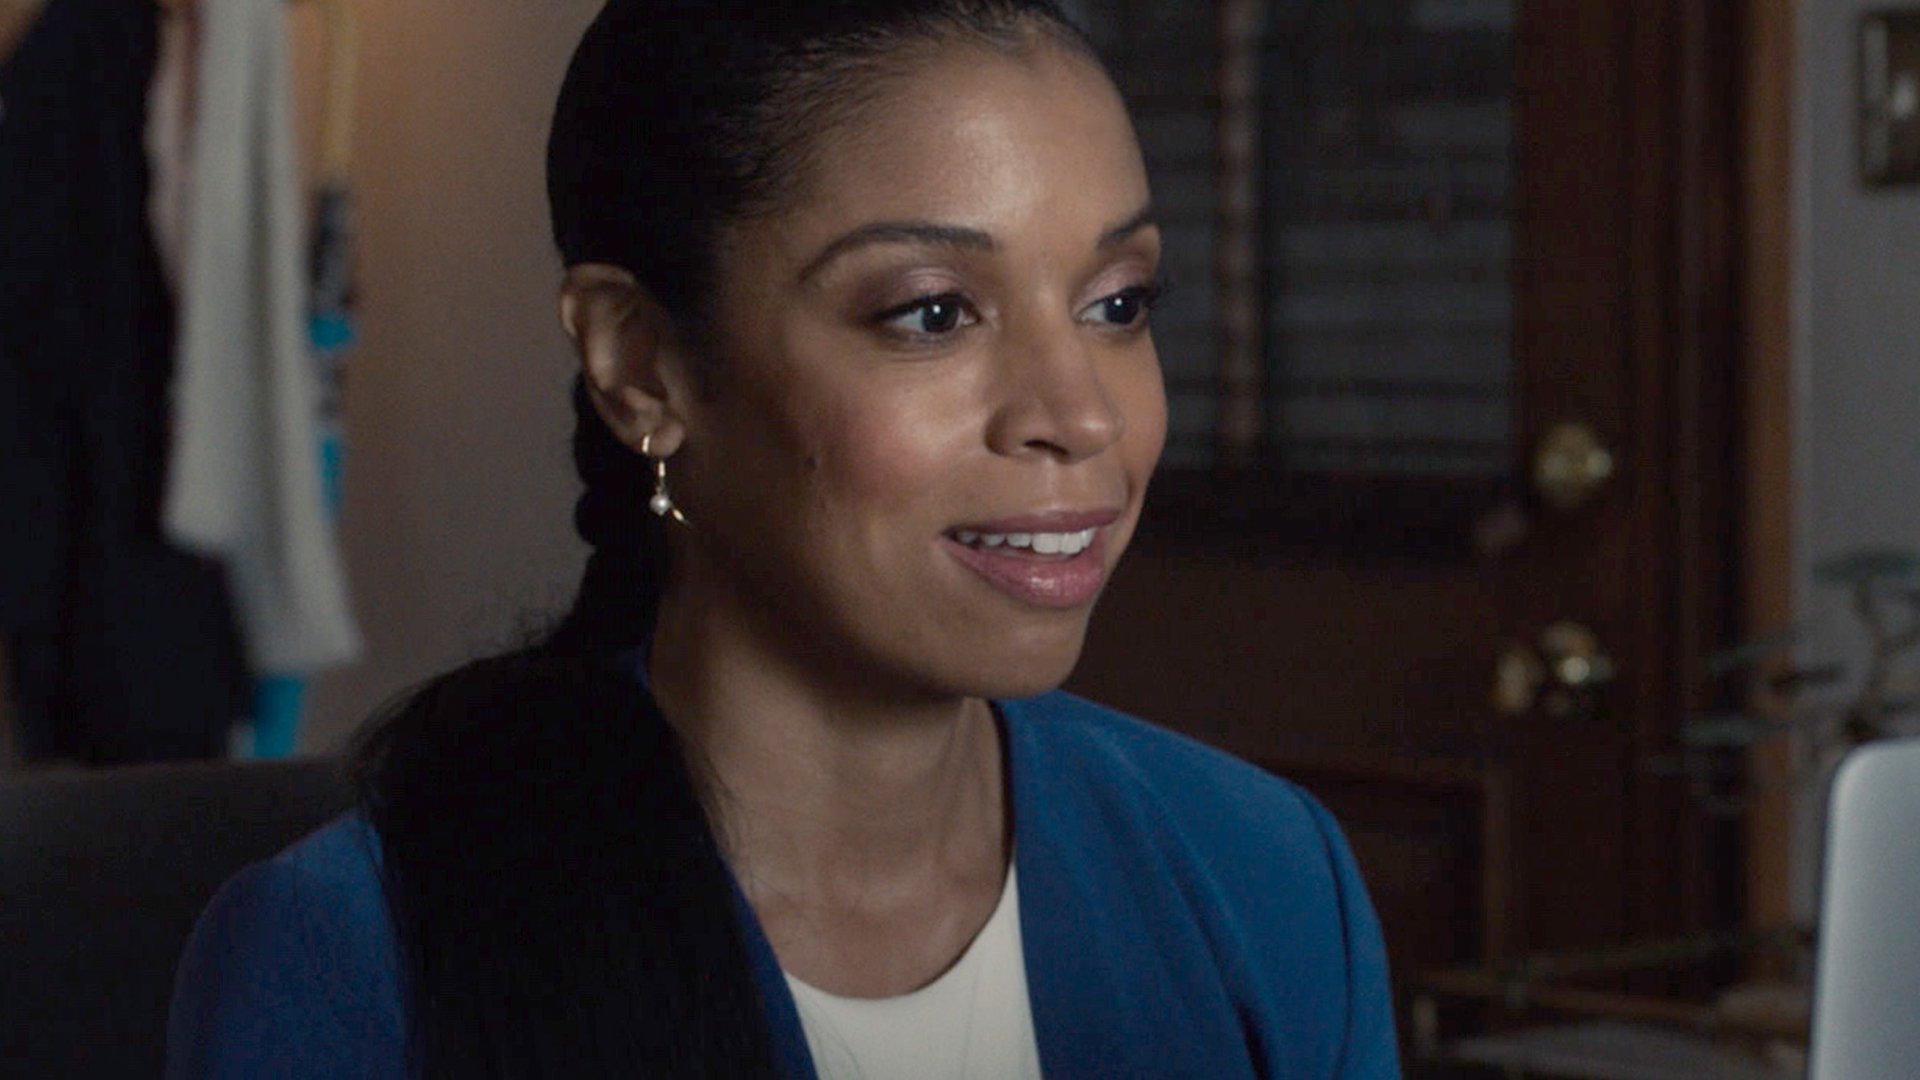 Susan Kelechi Watson as Beth Pearson during a video call interview in ‘This Is Us’ Season 5 Episode 14, ‘The Music and the Mirror’